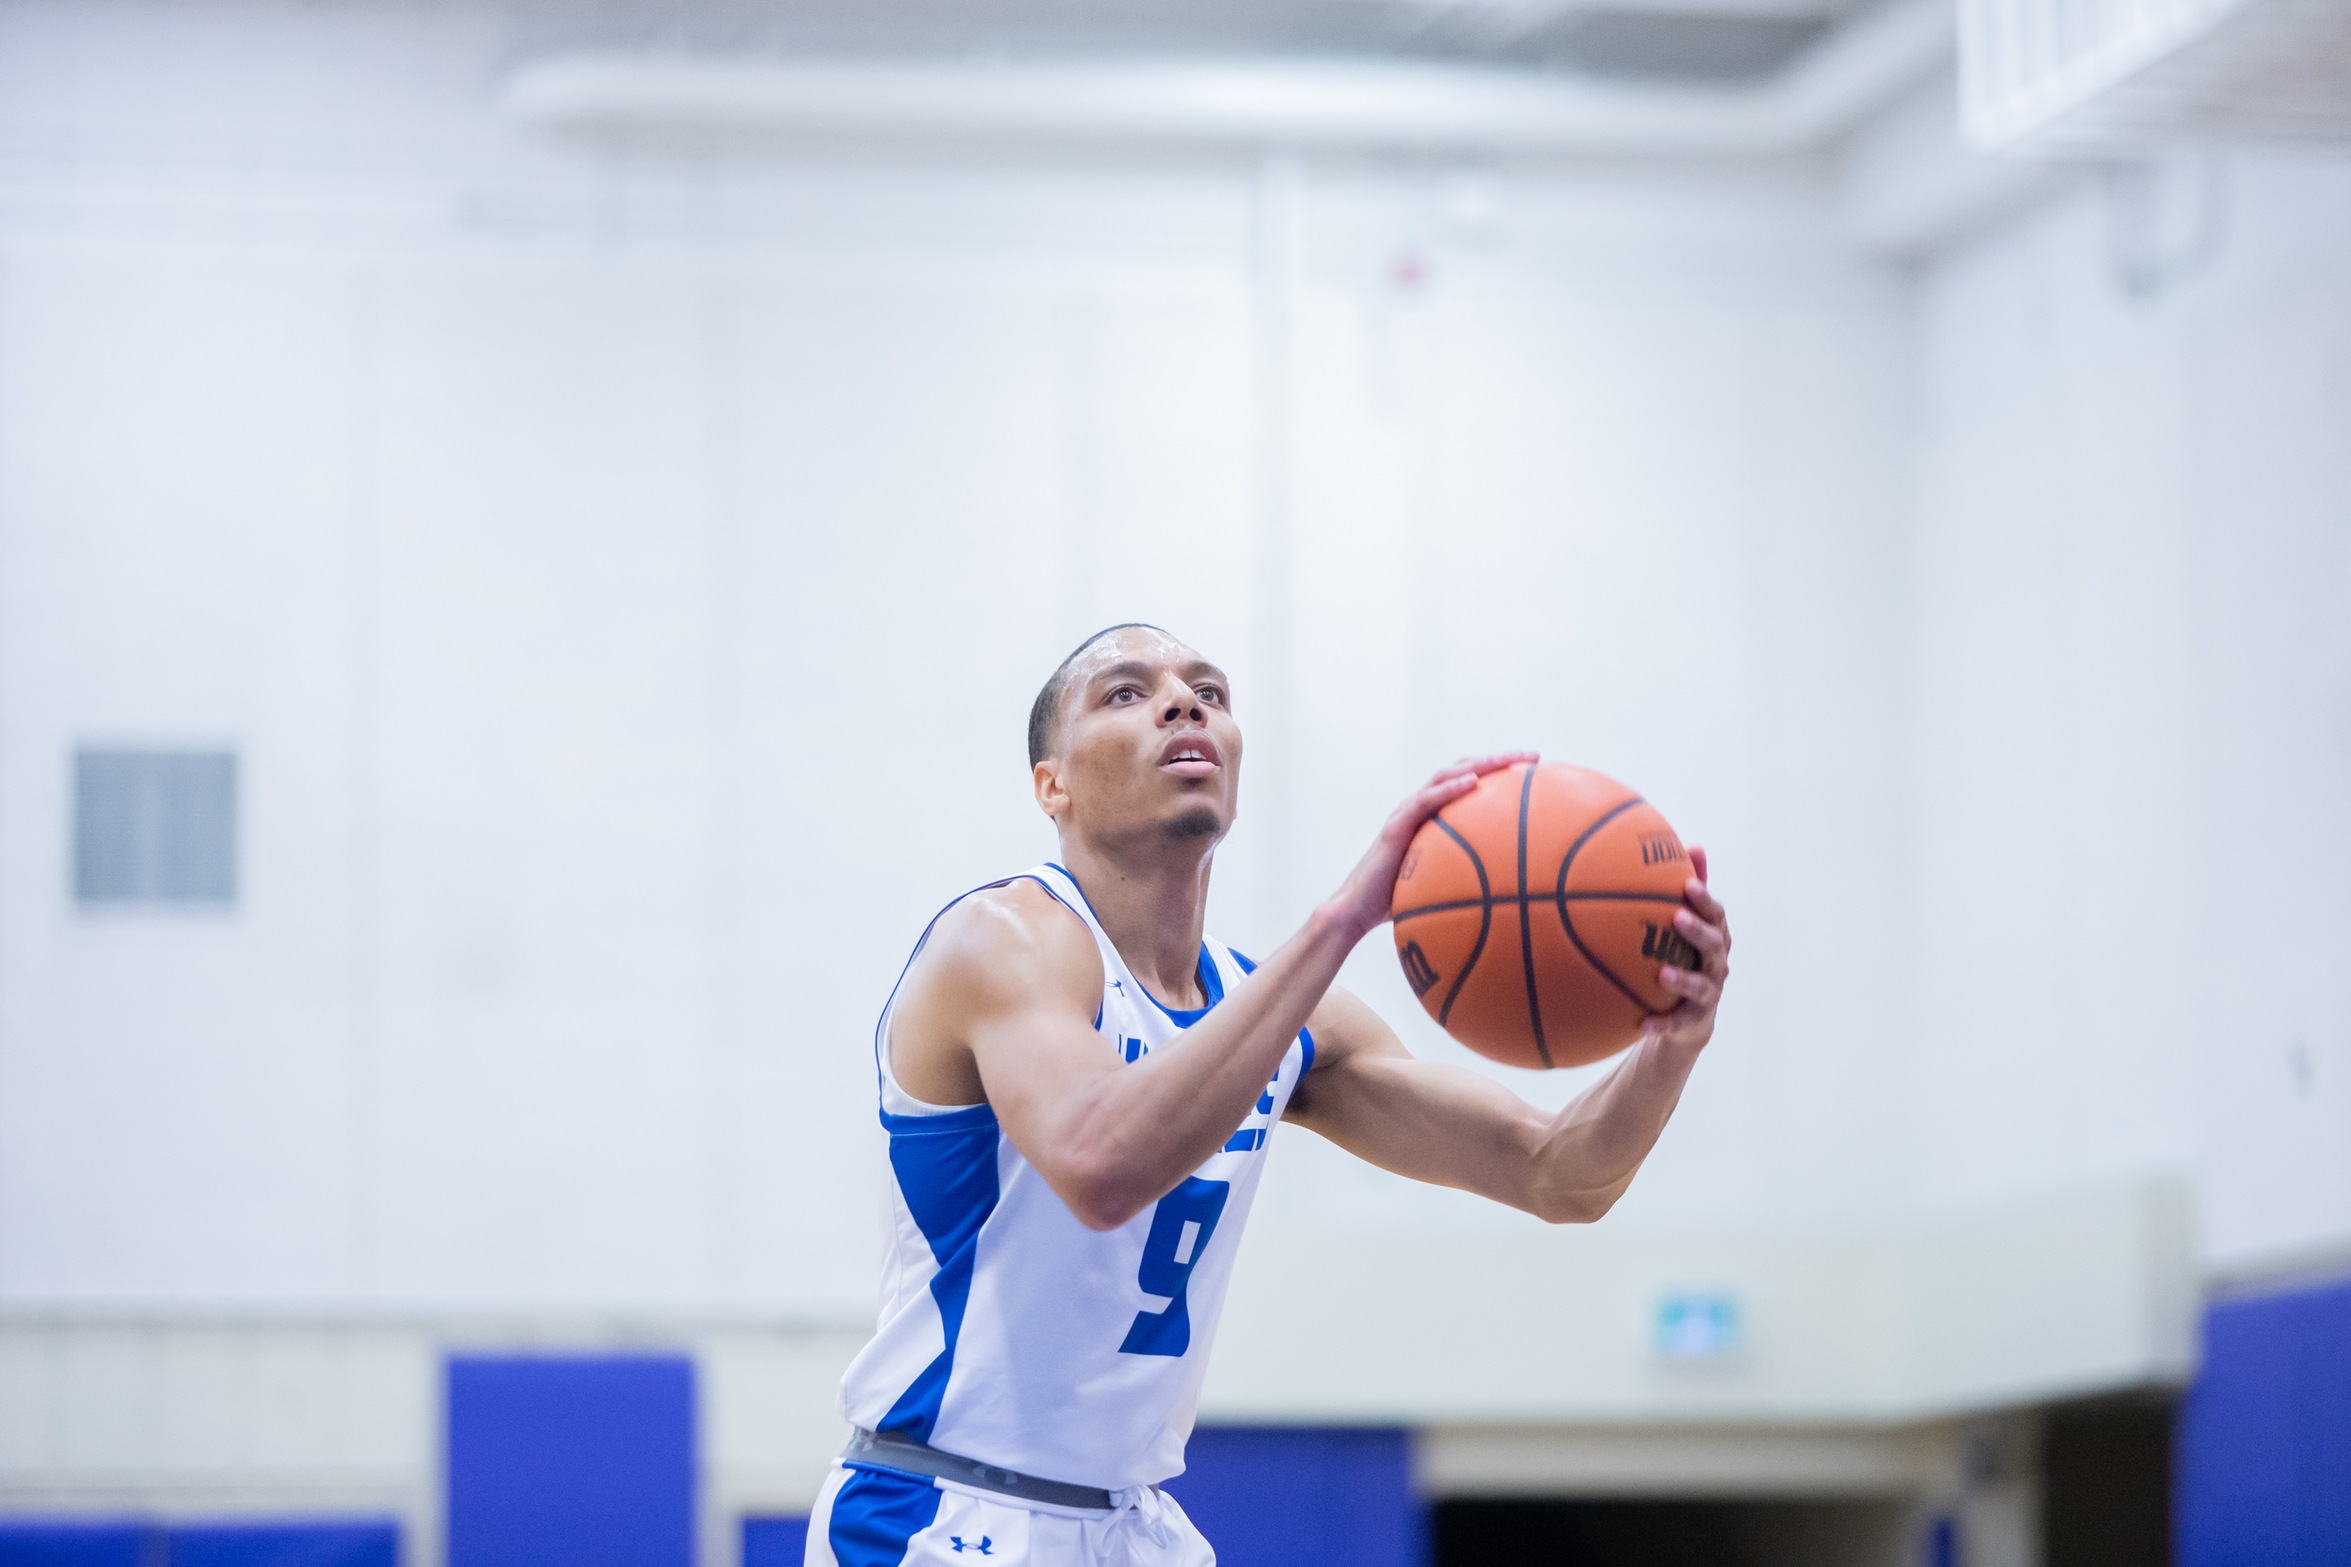 HUSKIES MEN'S BASKETBALL COME UP SHORT TO LORDS